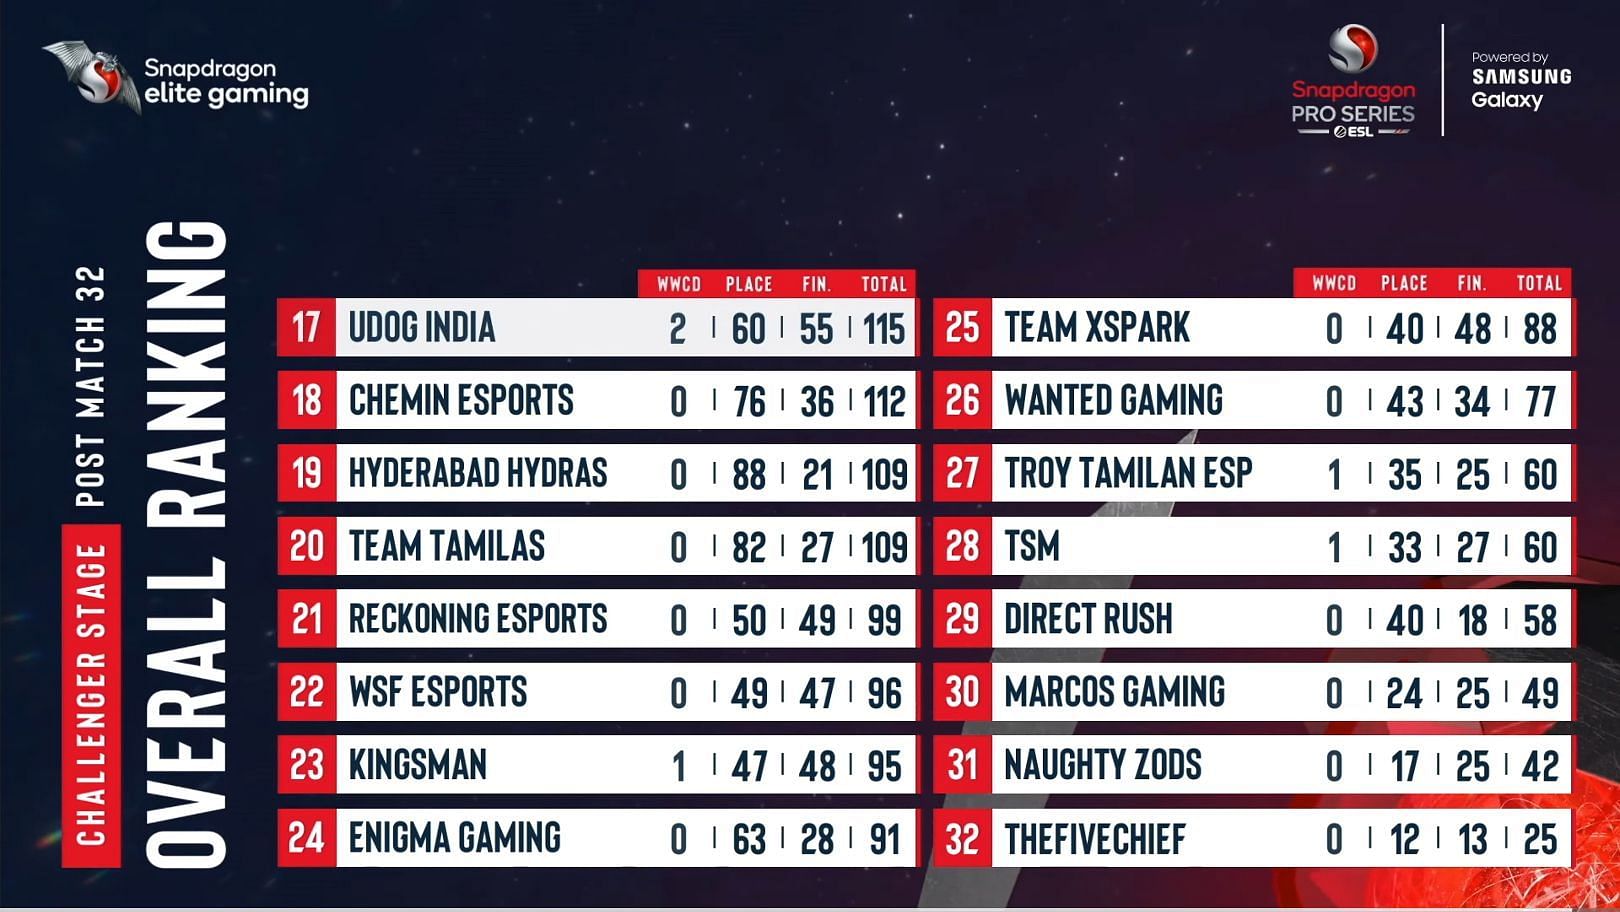 TSM finished 28th after PUBG New State Mobile Challenger Day 6 (Image via Nodwin Gaming)